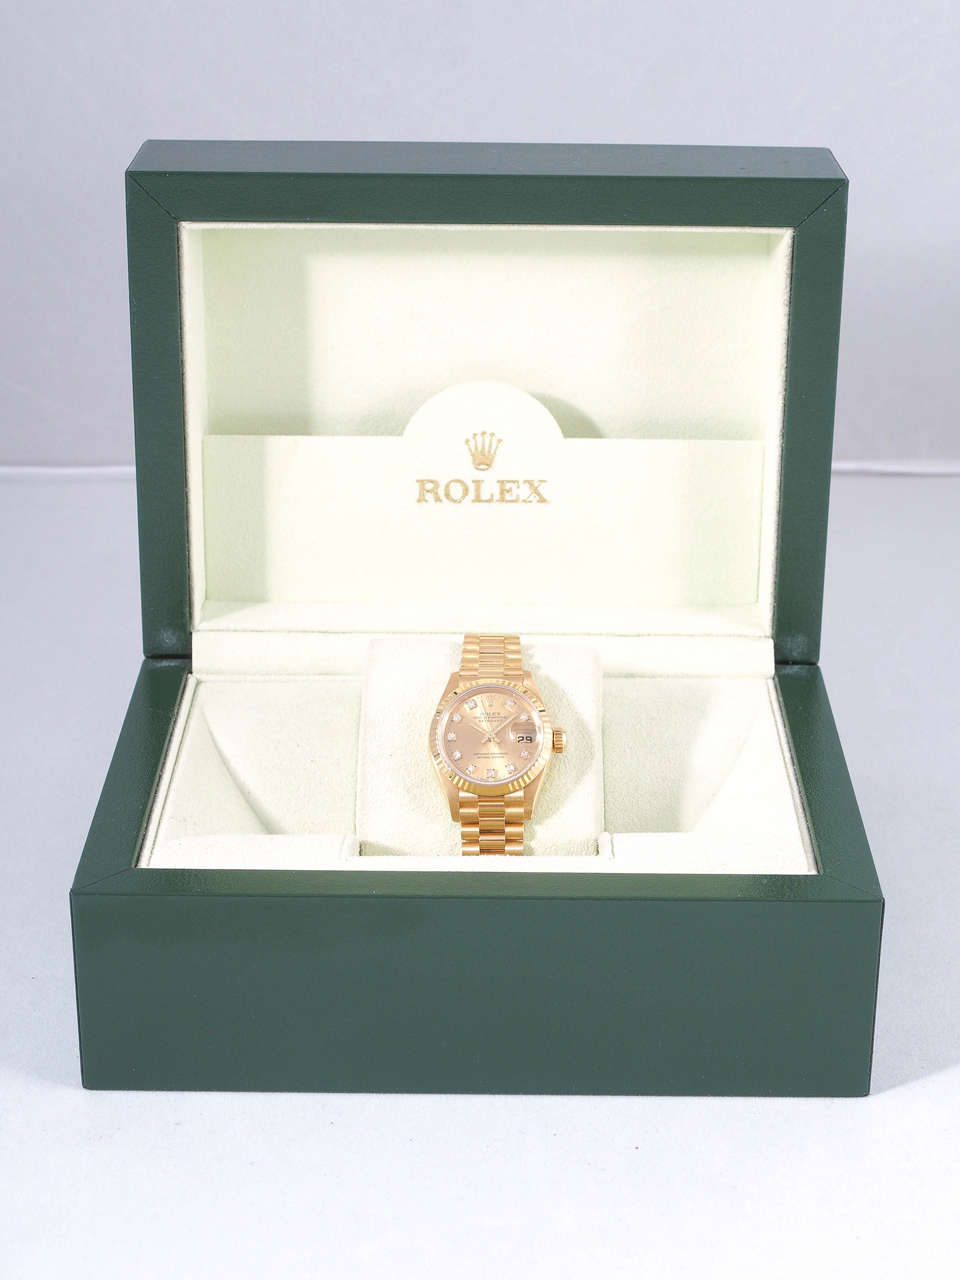 Rolex Lady's 18k yellow gold President wristwatch, Ref. 69178, Serial number S762671 

Movement: Automatic
Case: 26mm with a champagne dial and factory diamond markers.
Crystal: Scratch resistant Sapphire
Box only

1 year full warranty on the